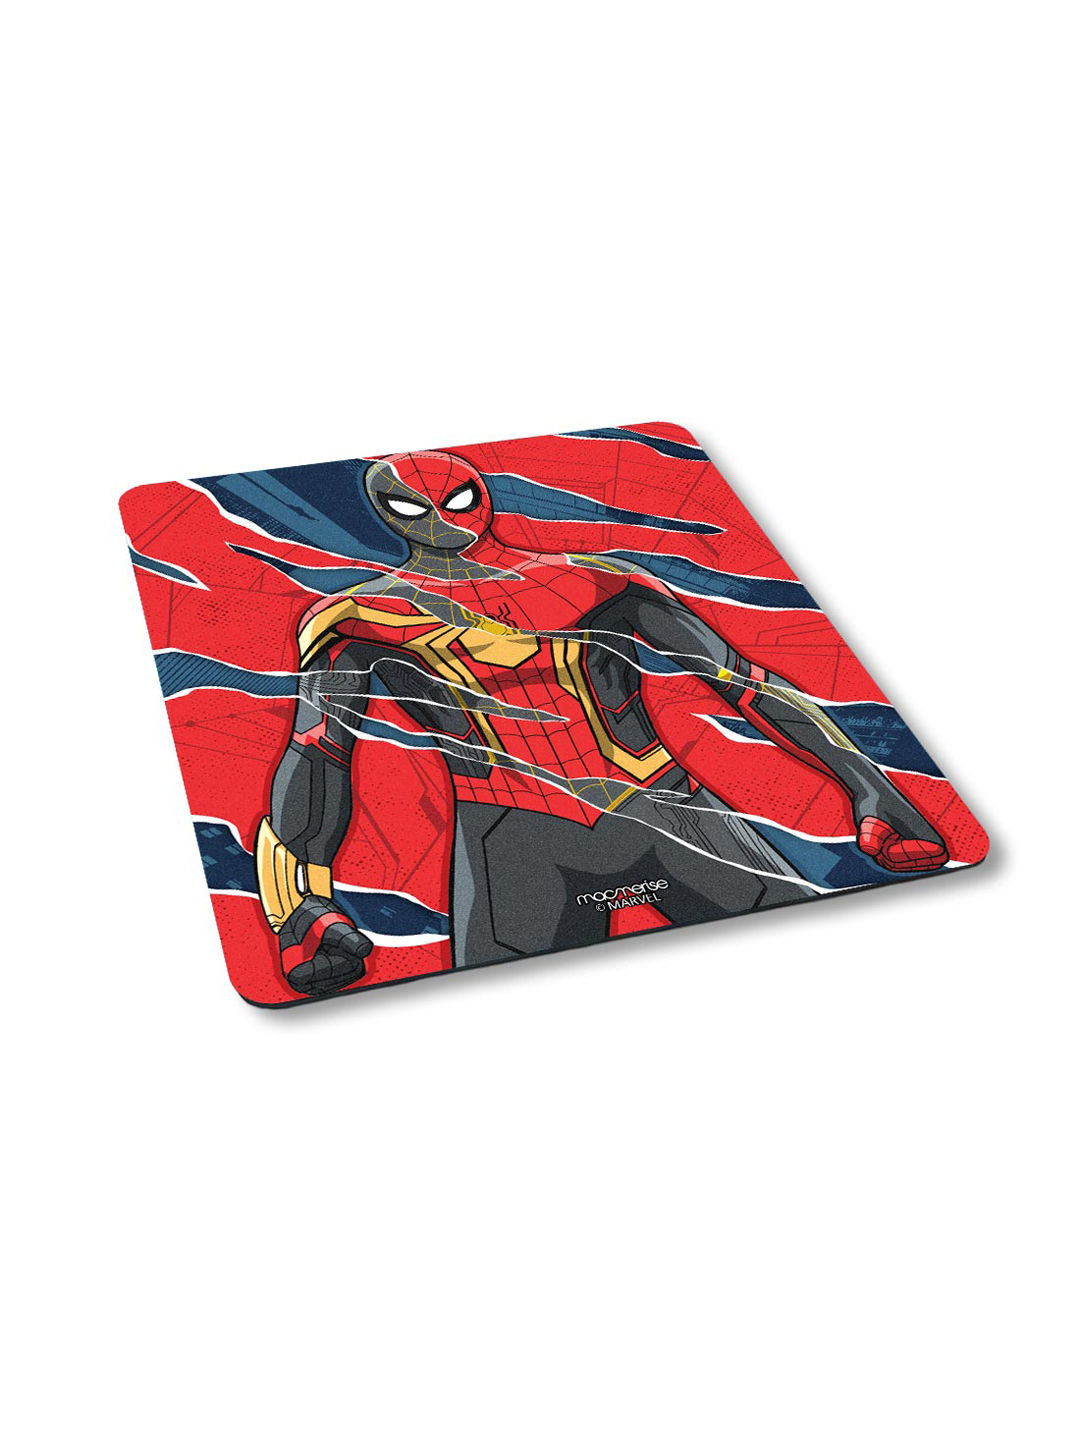 All 3 Spidey - Macmerise Mouse Pad